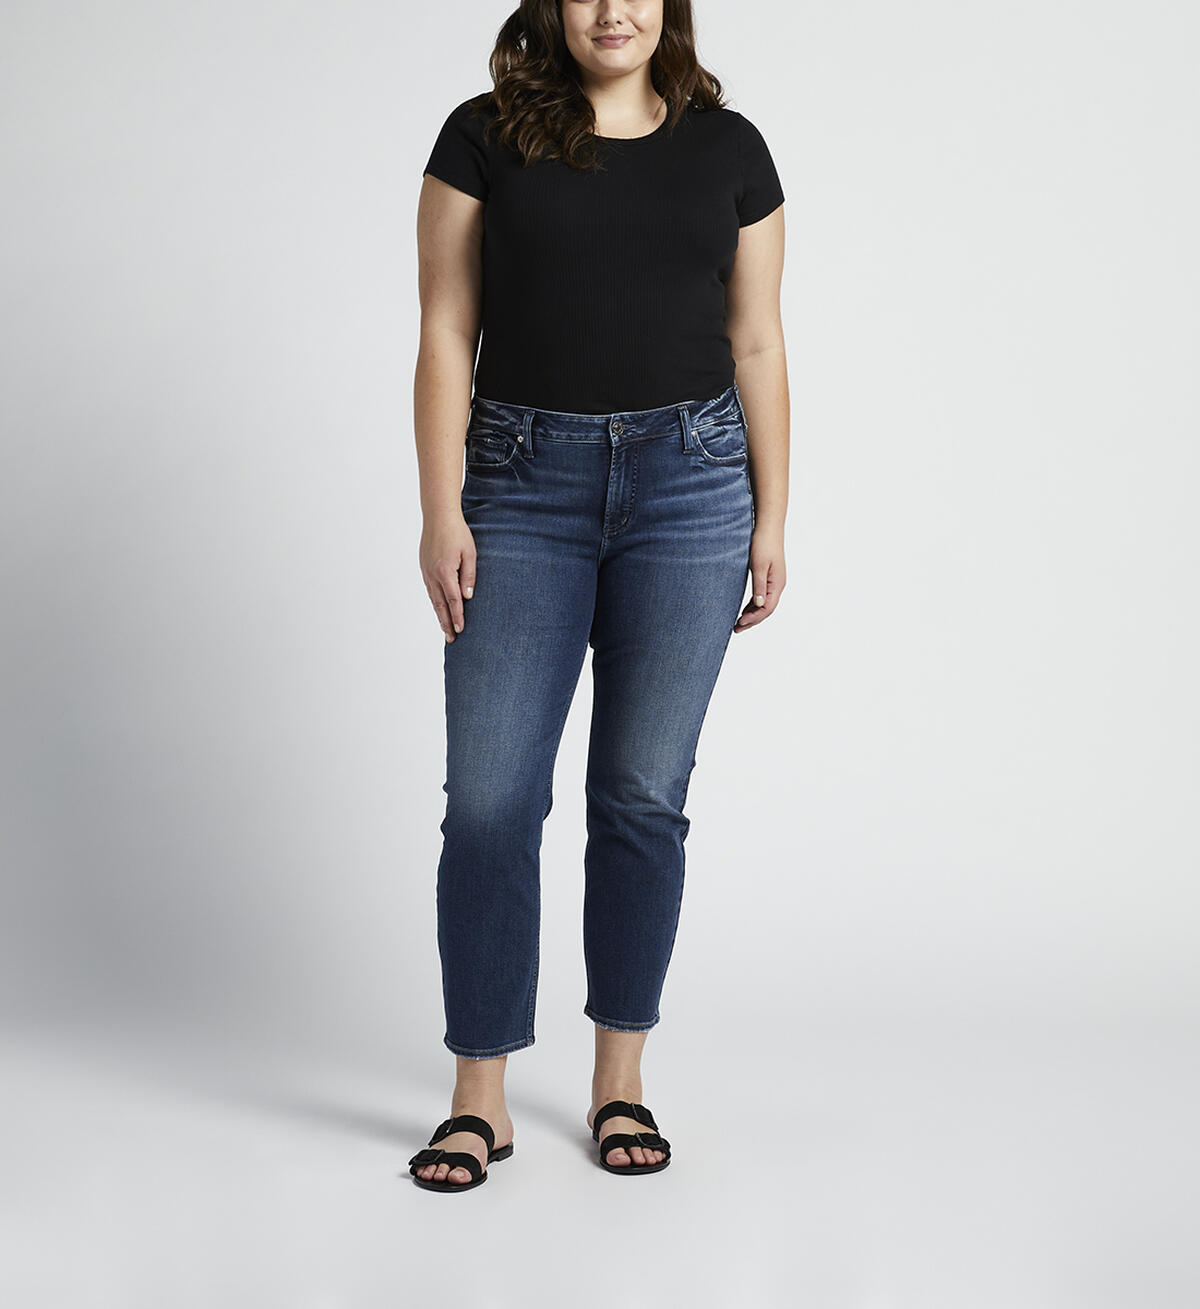 Elyse Mid Rise Straight Crop Jeans Plus Size, , hi-res image number 0